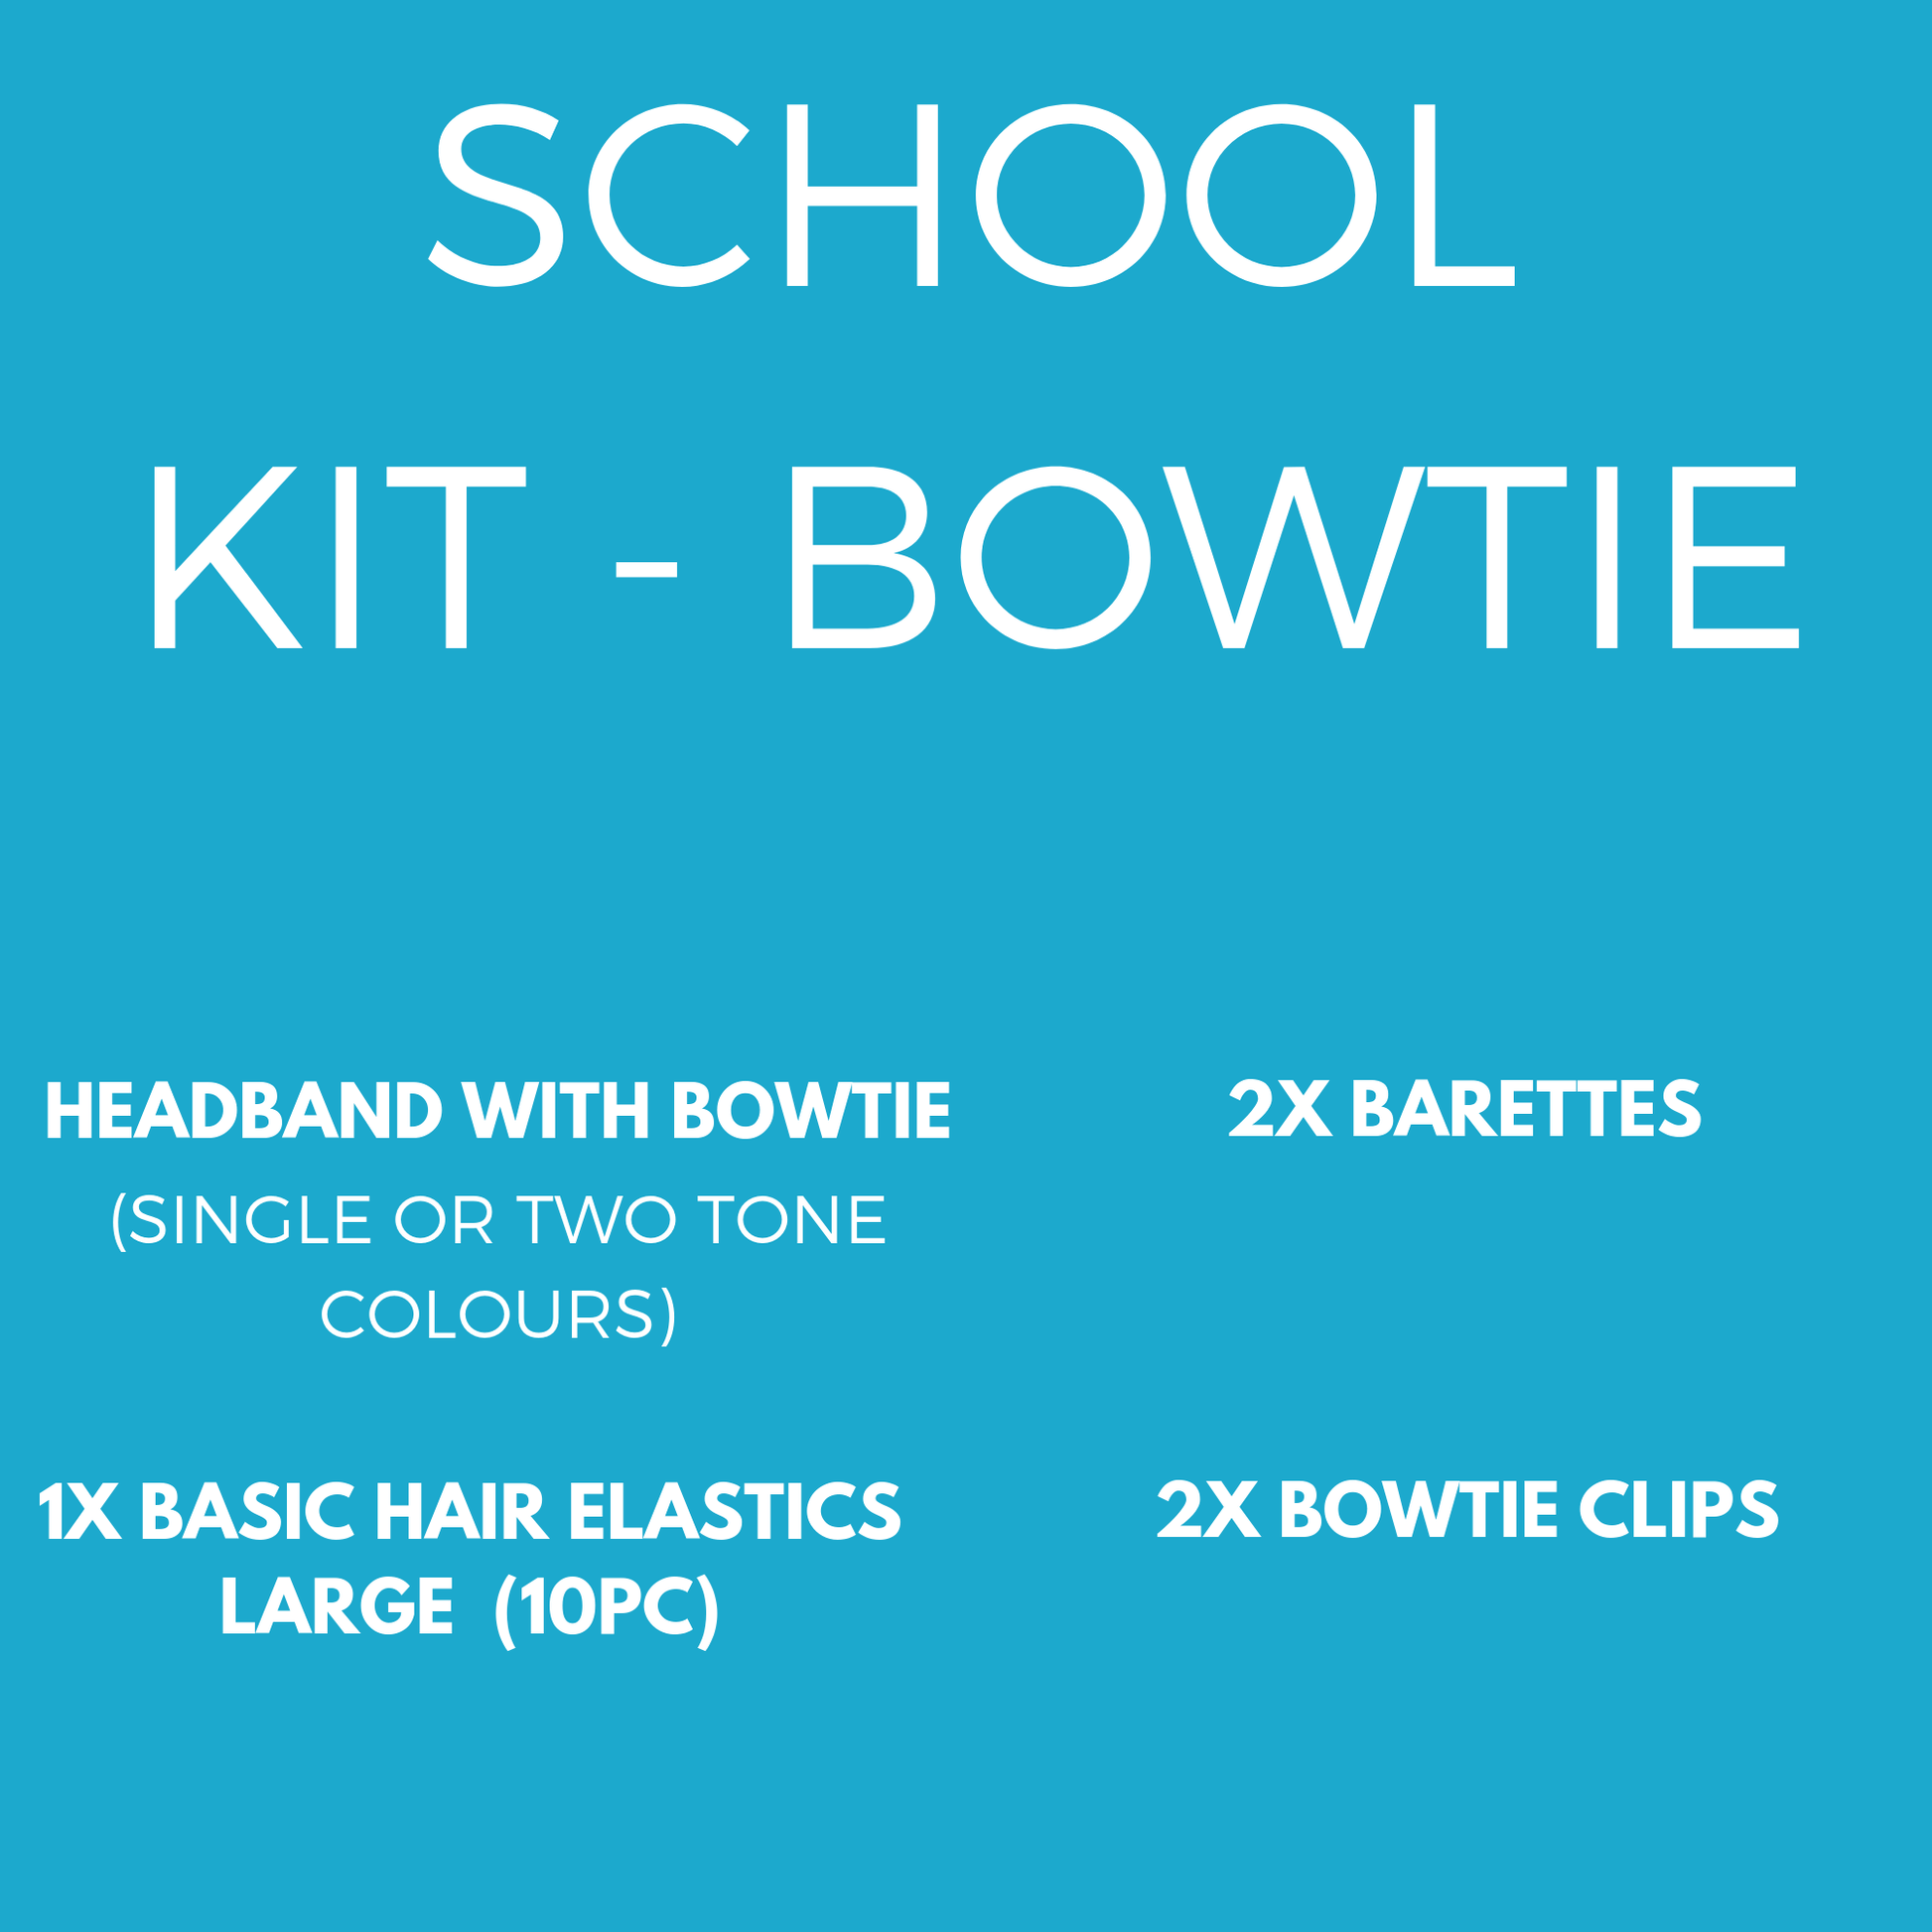 Custom Colours: Choose Your Own (3) - Assorted Hair Accessories - School Uniform Hair Accessories - Ponytails and Fairytales